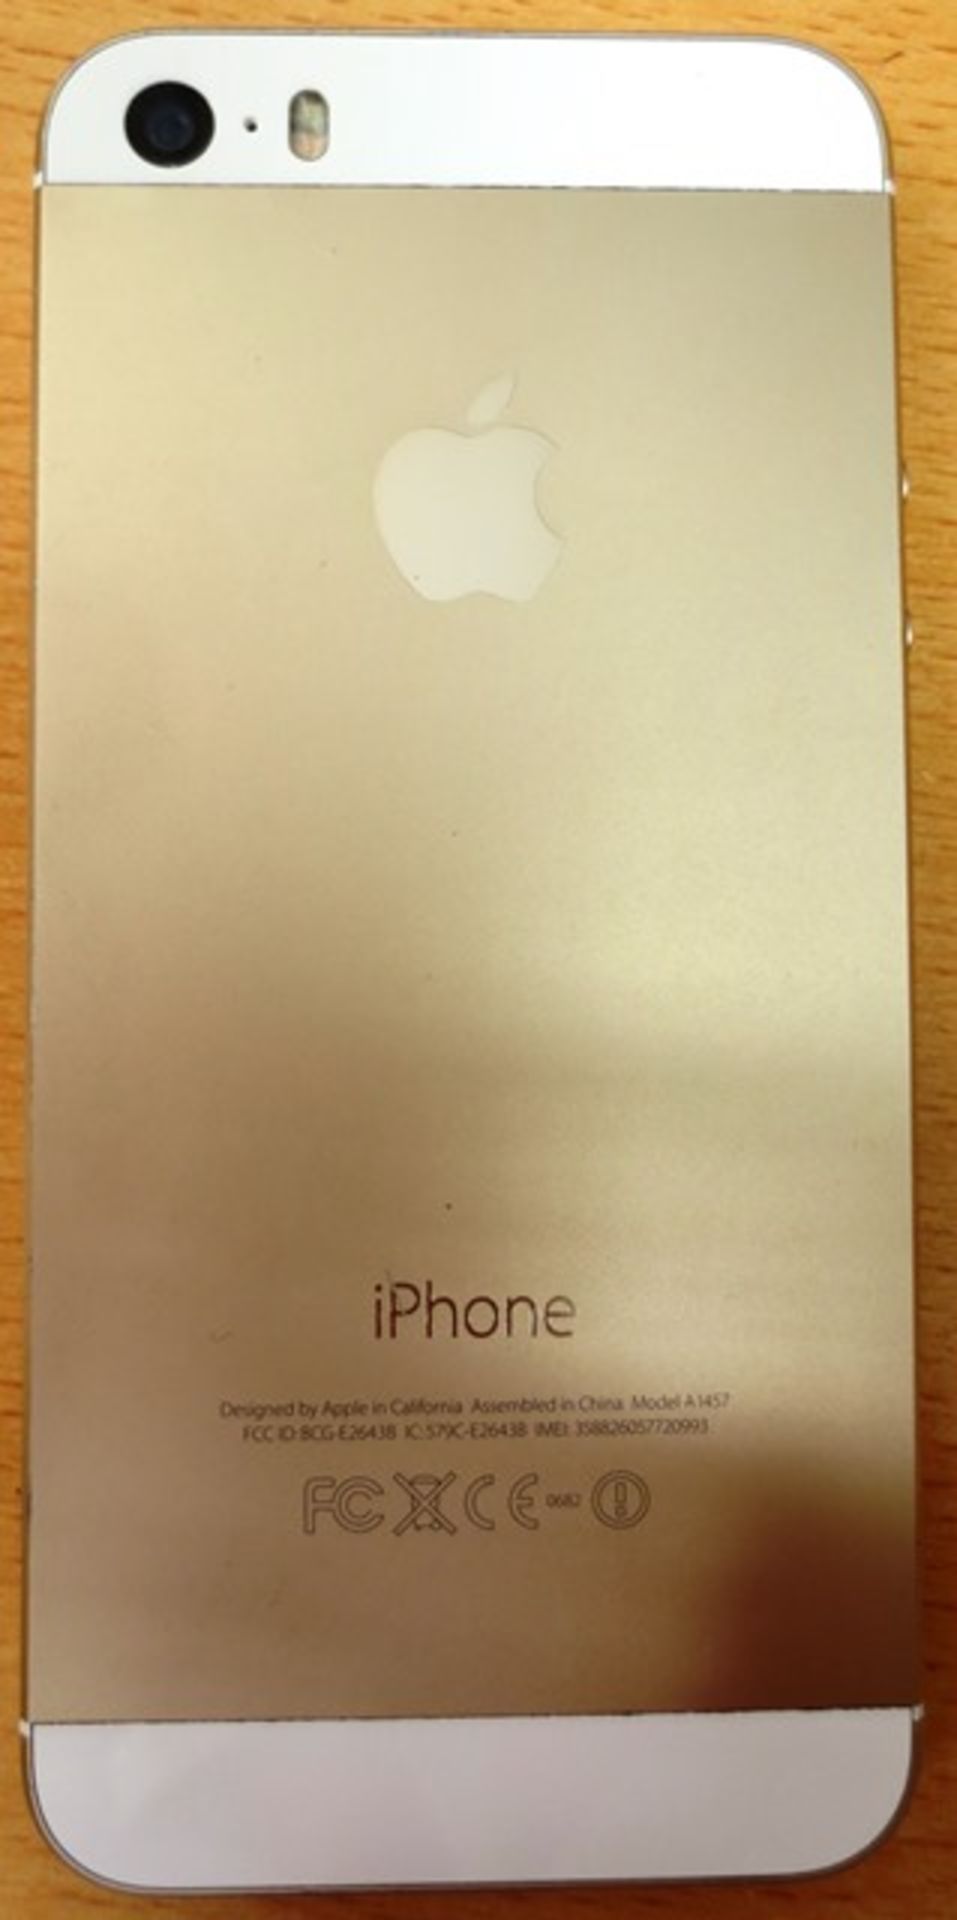 Apple iPhone 5s, 16GB. Model A1457. Previous Network Vodafone. White & Gold (Please note: No charge - Image 2 of 2